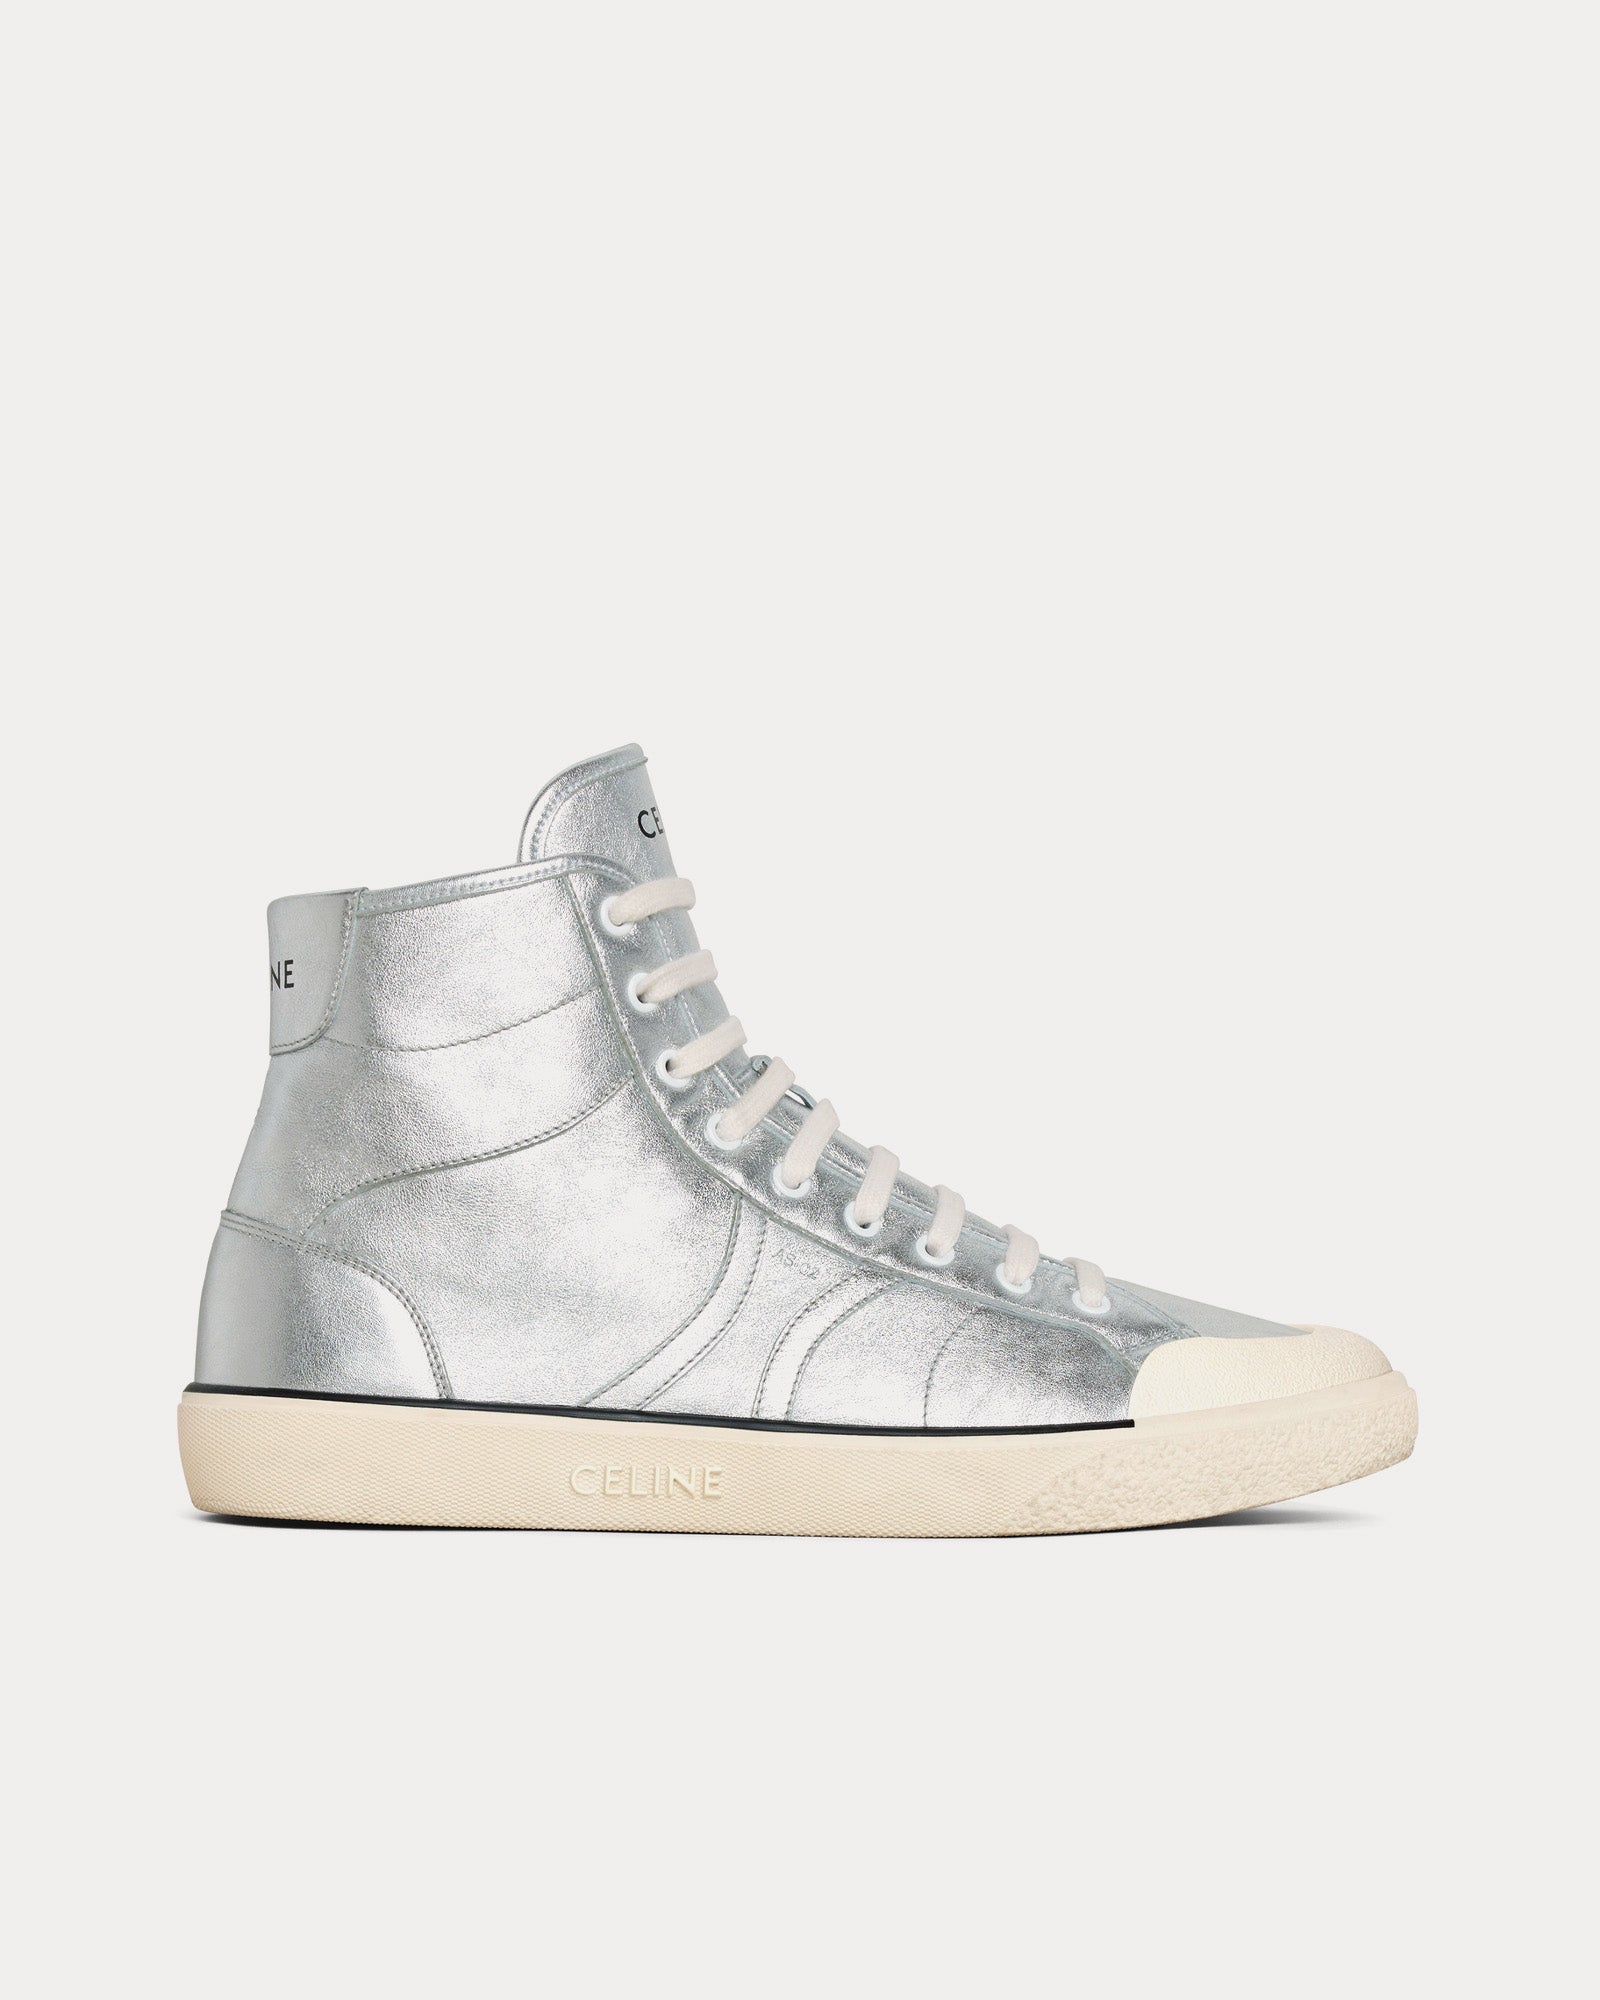 AS-02 Alan Lace-Up Metalized Calfskin Silver Mid Top Sneakers